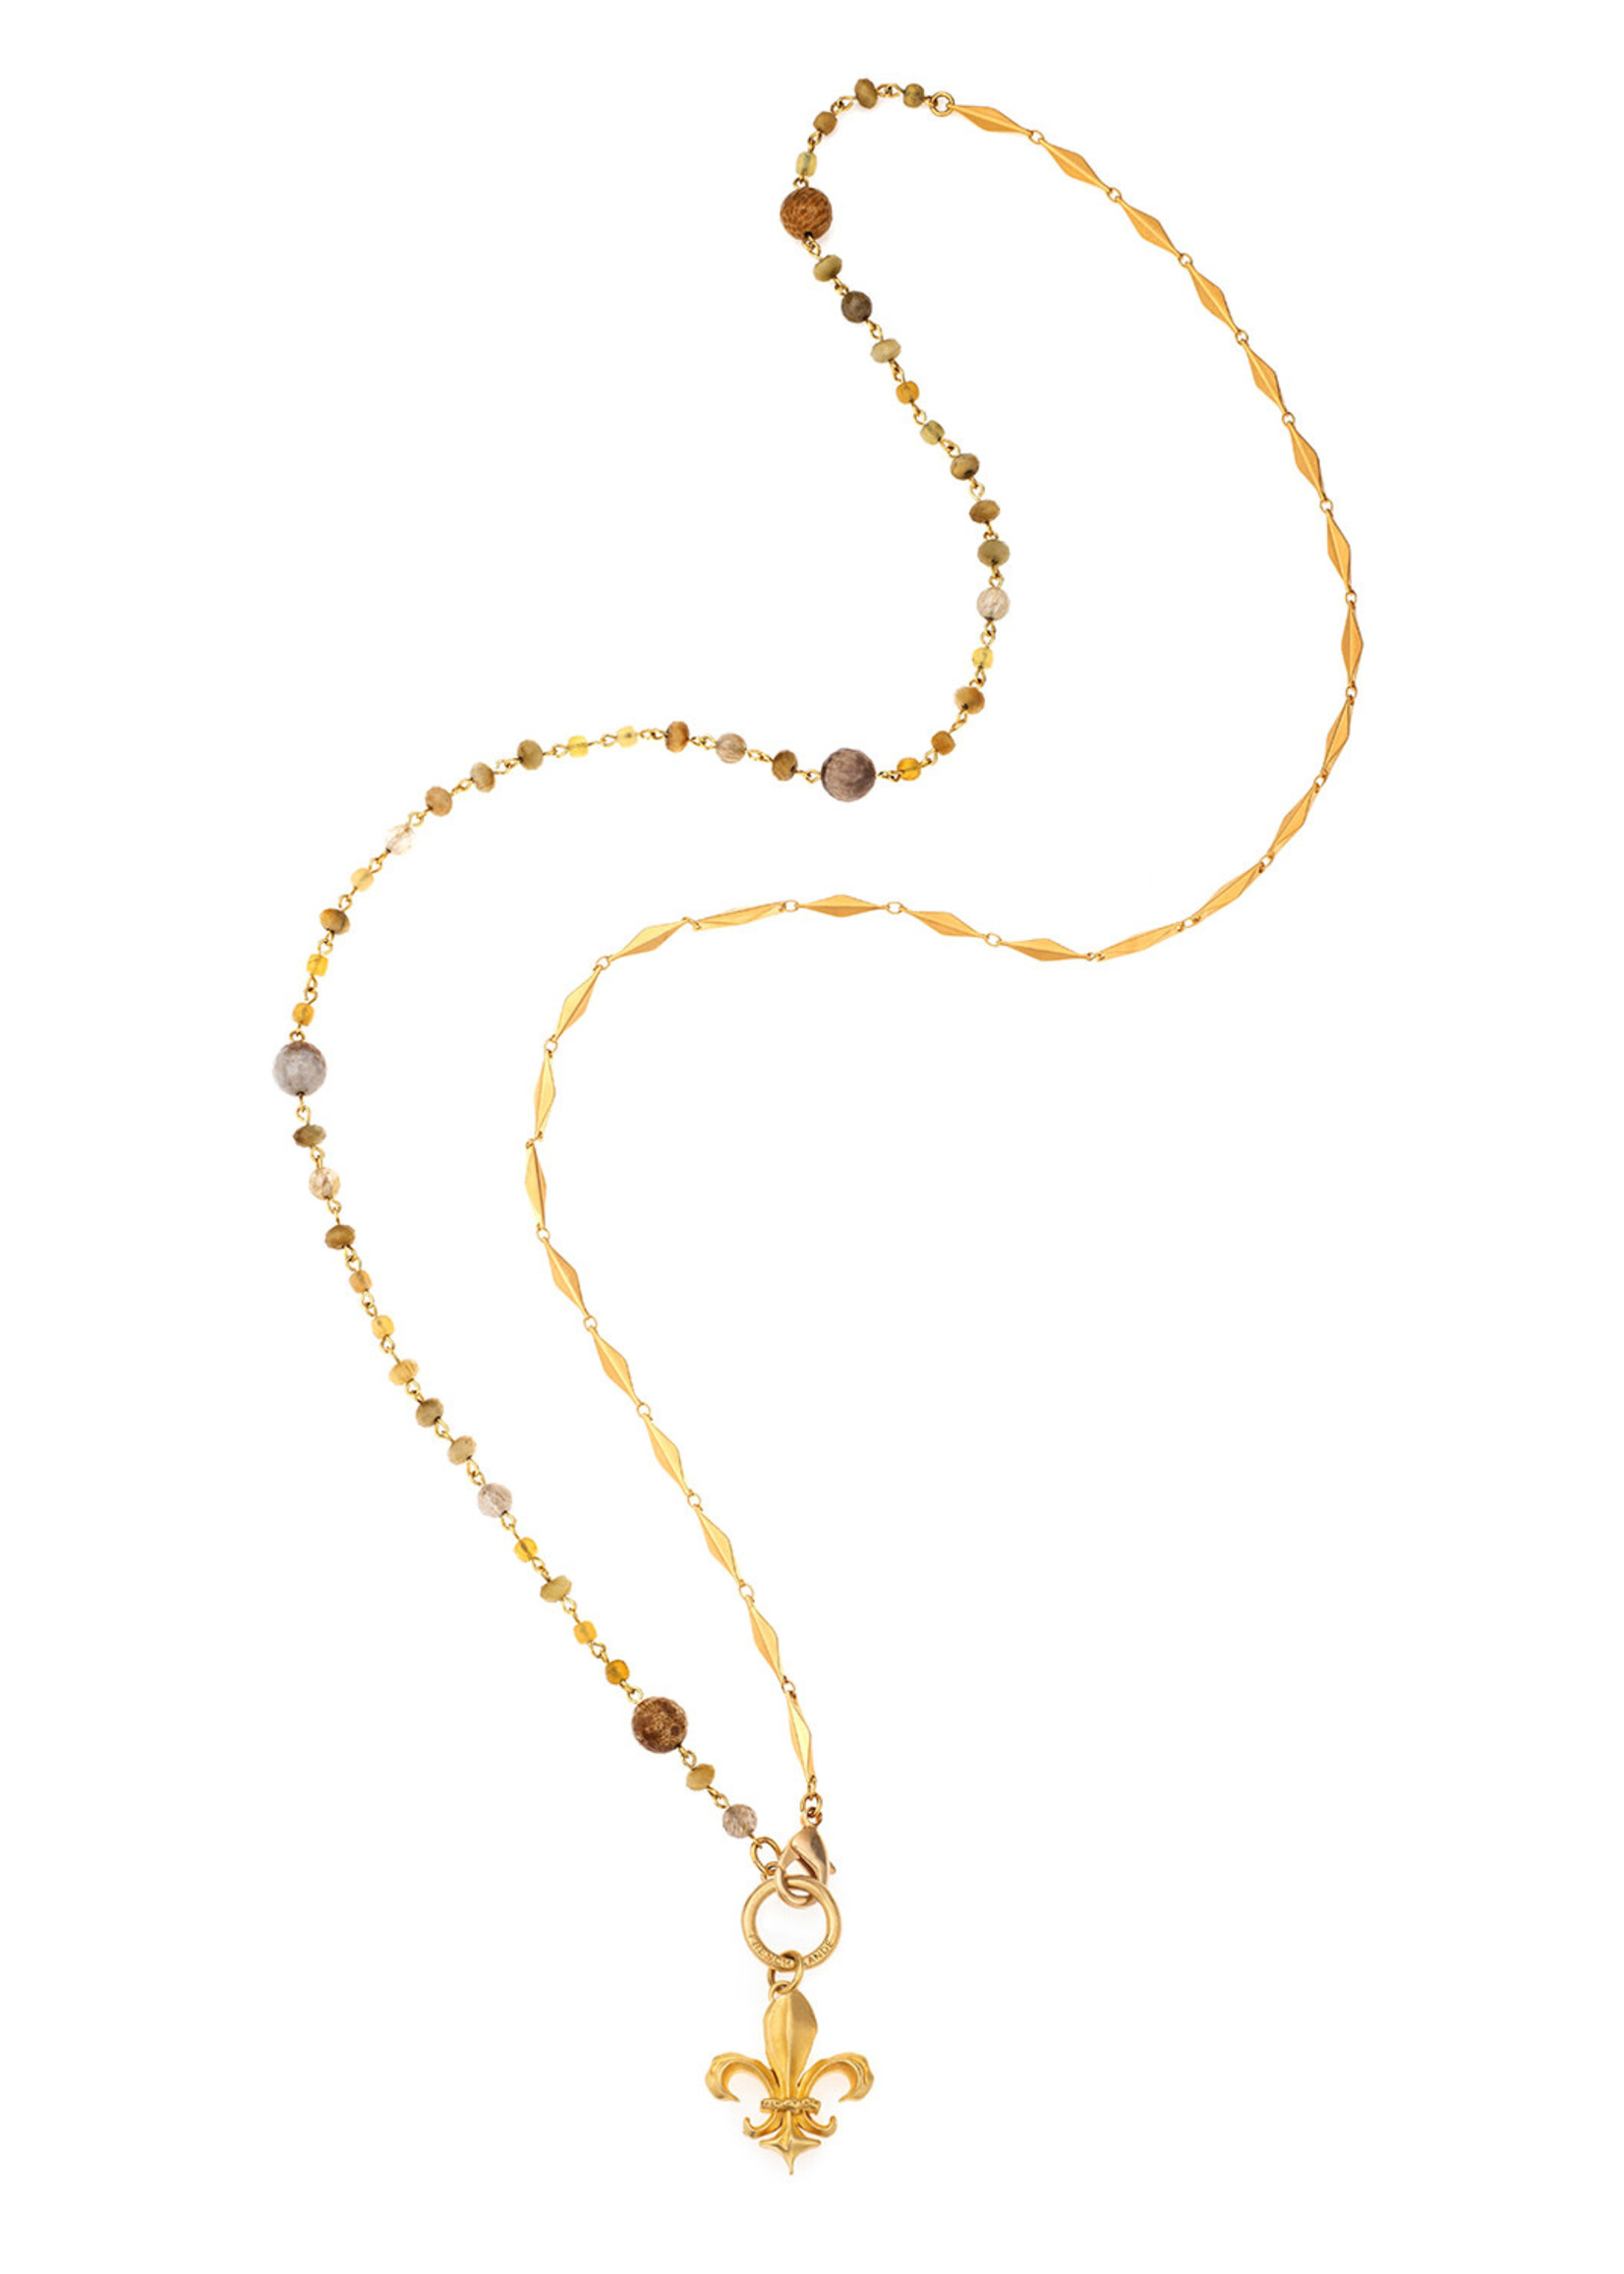 FRENCH KANDE BUTTERSCOTCH MIX WITH DIAMONT CHAIN AND FK FLEUR PENDANT